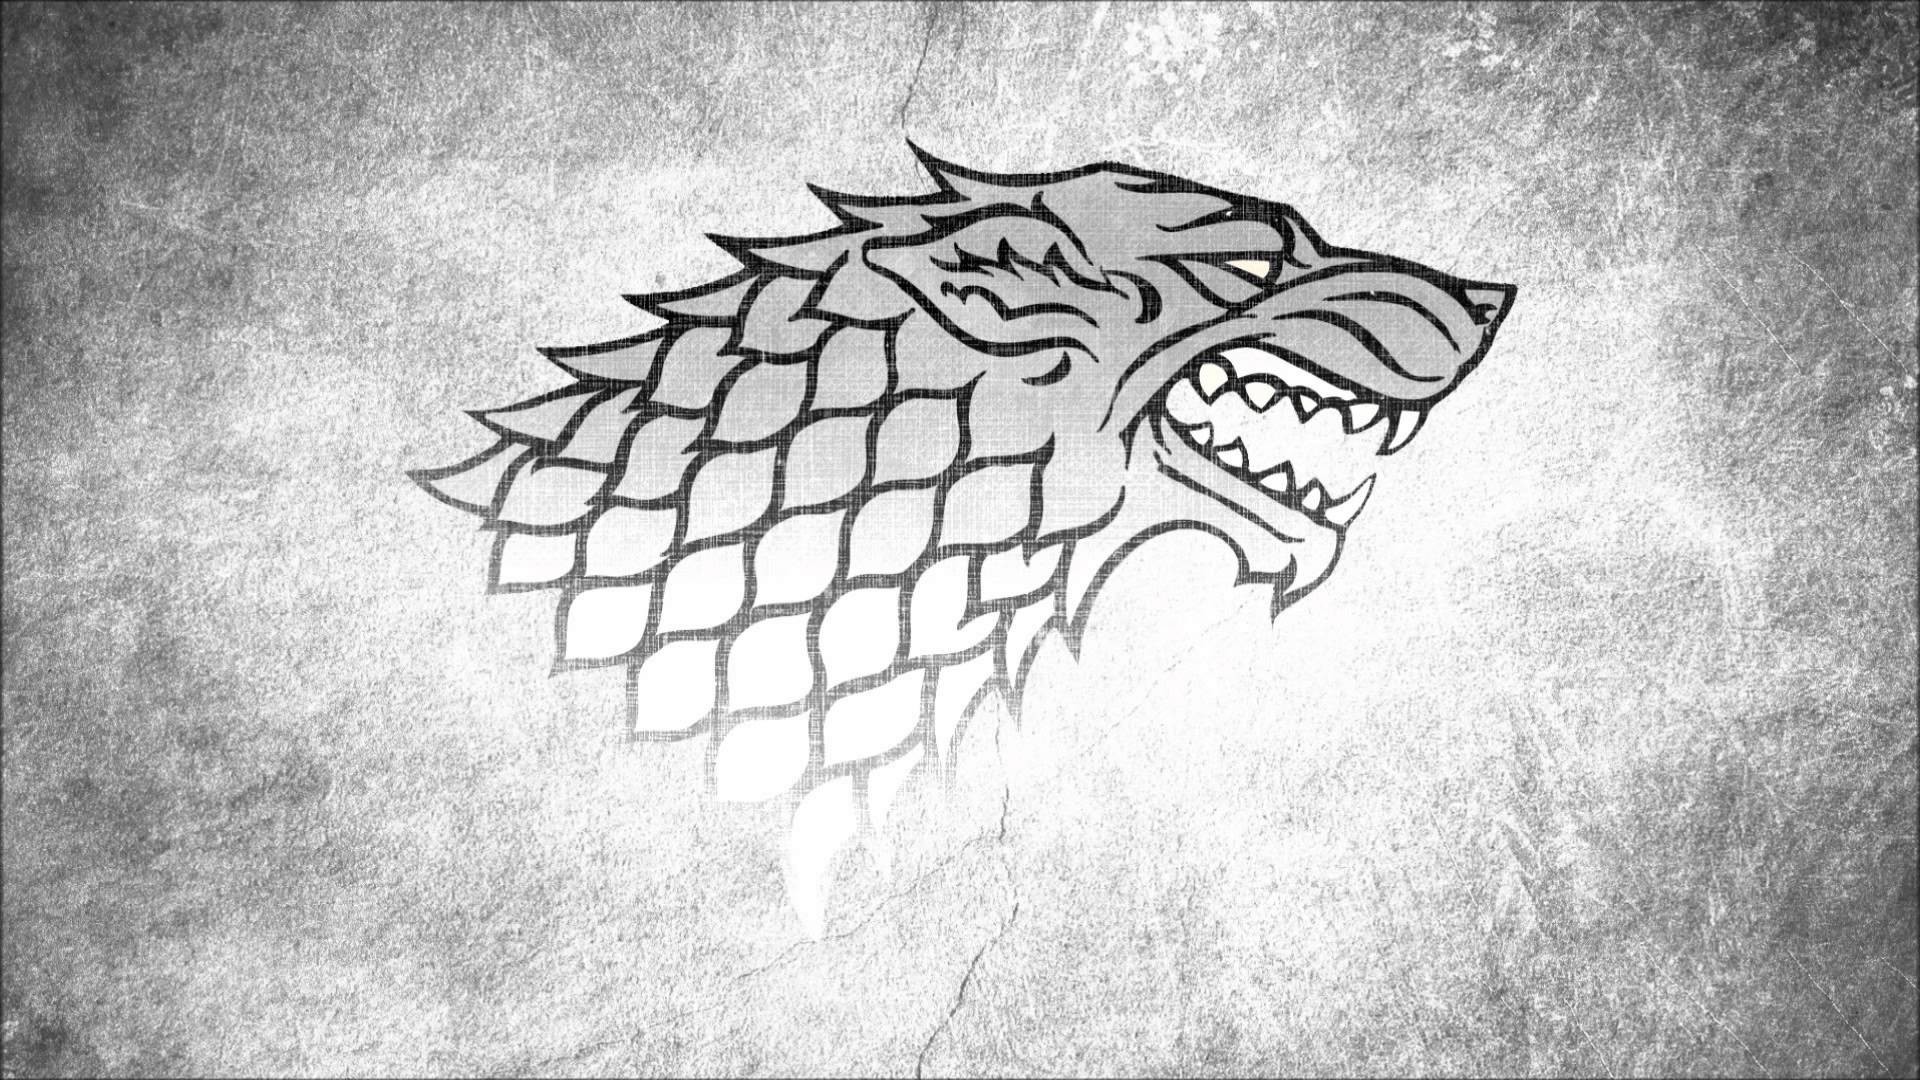 game of thrones wallpaper hd,drawing,sketch,illustration,black and white,mouth